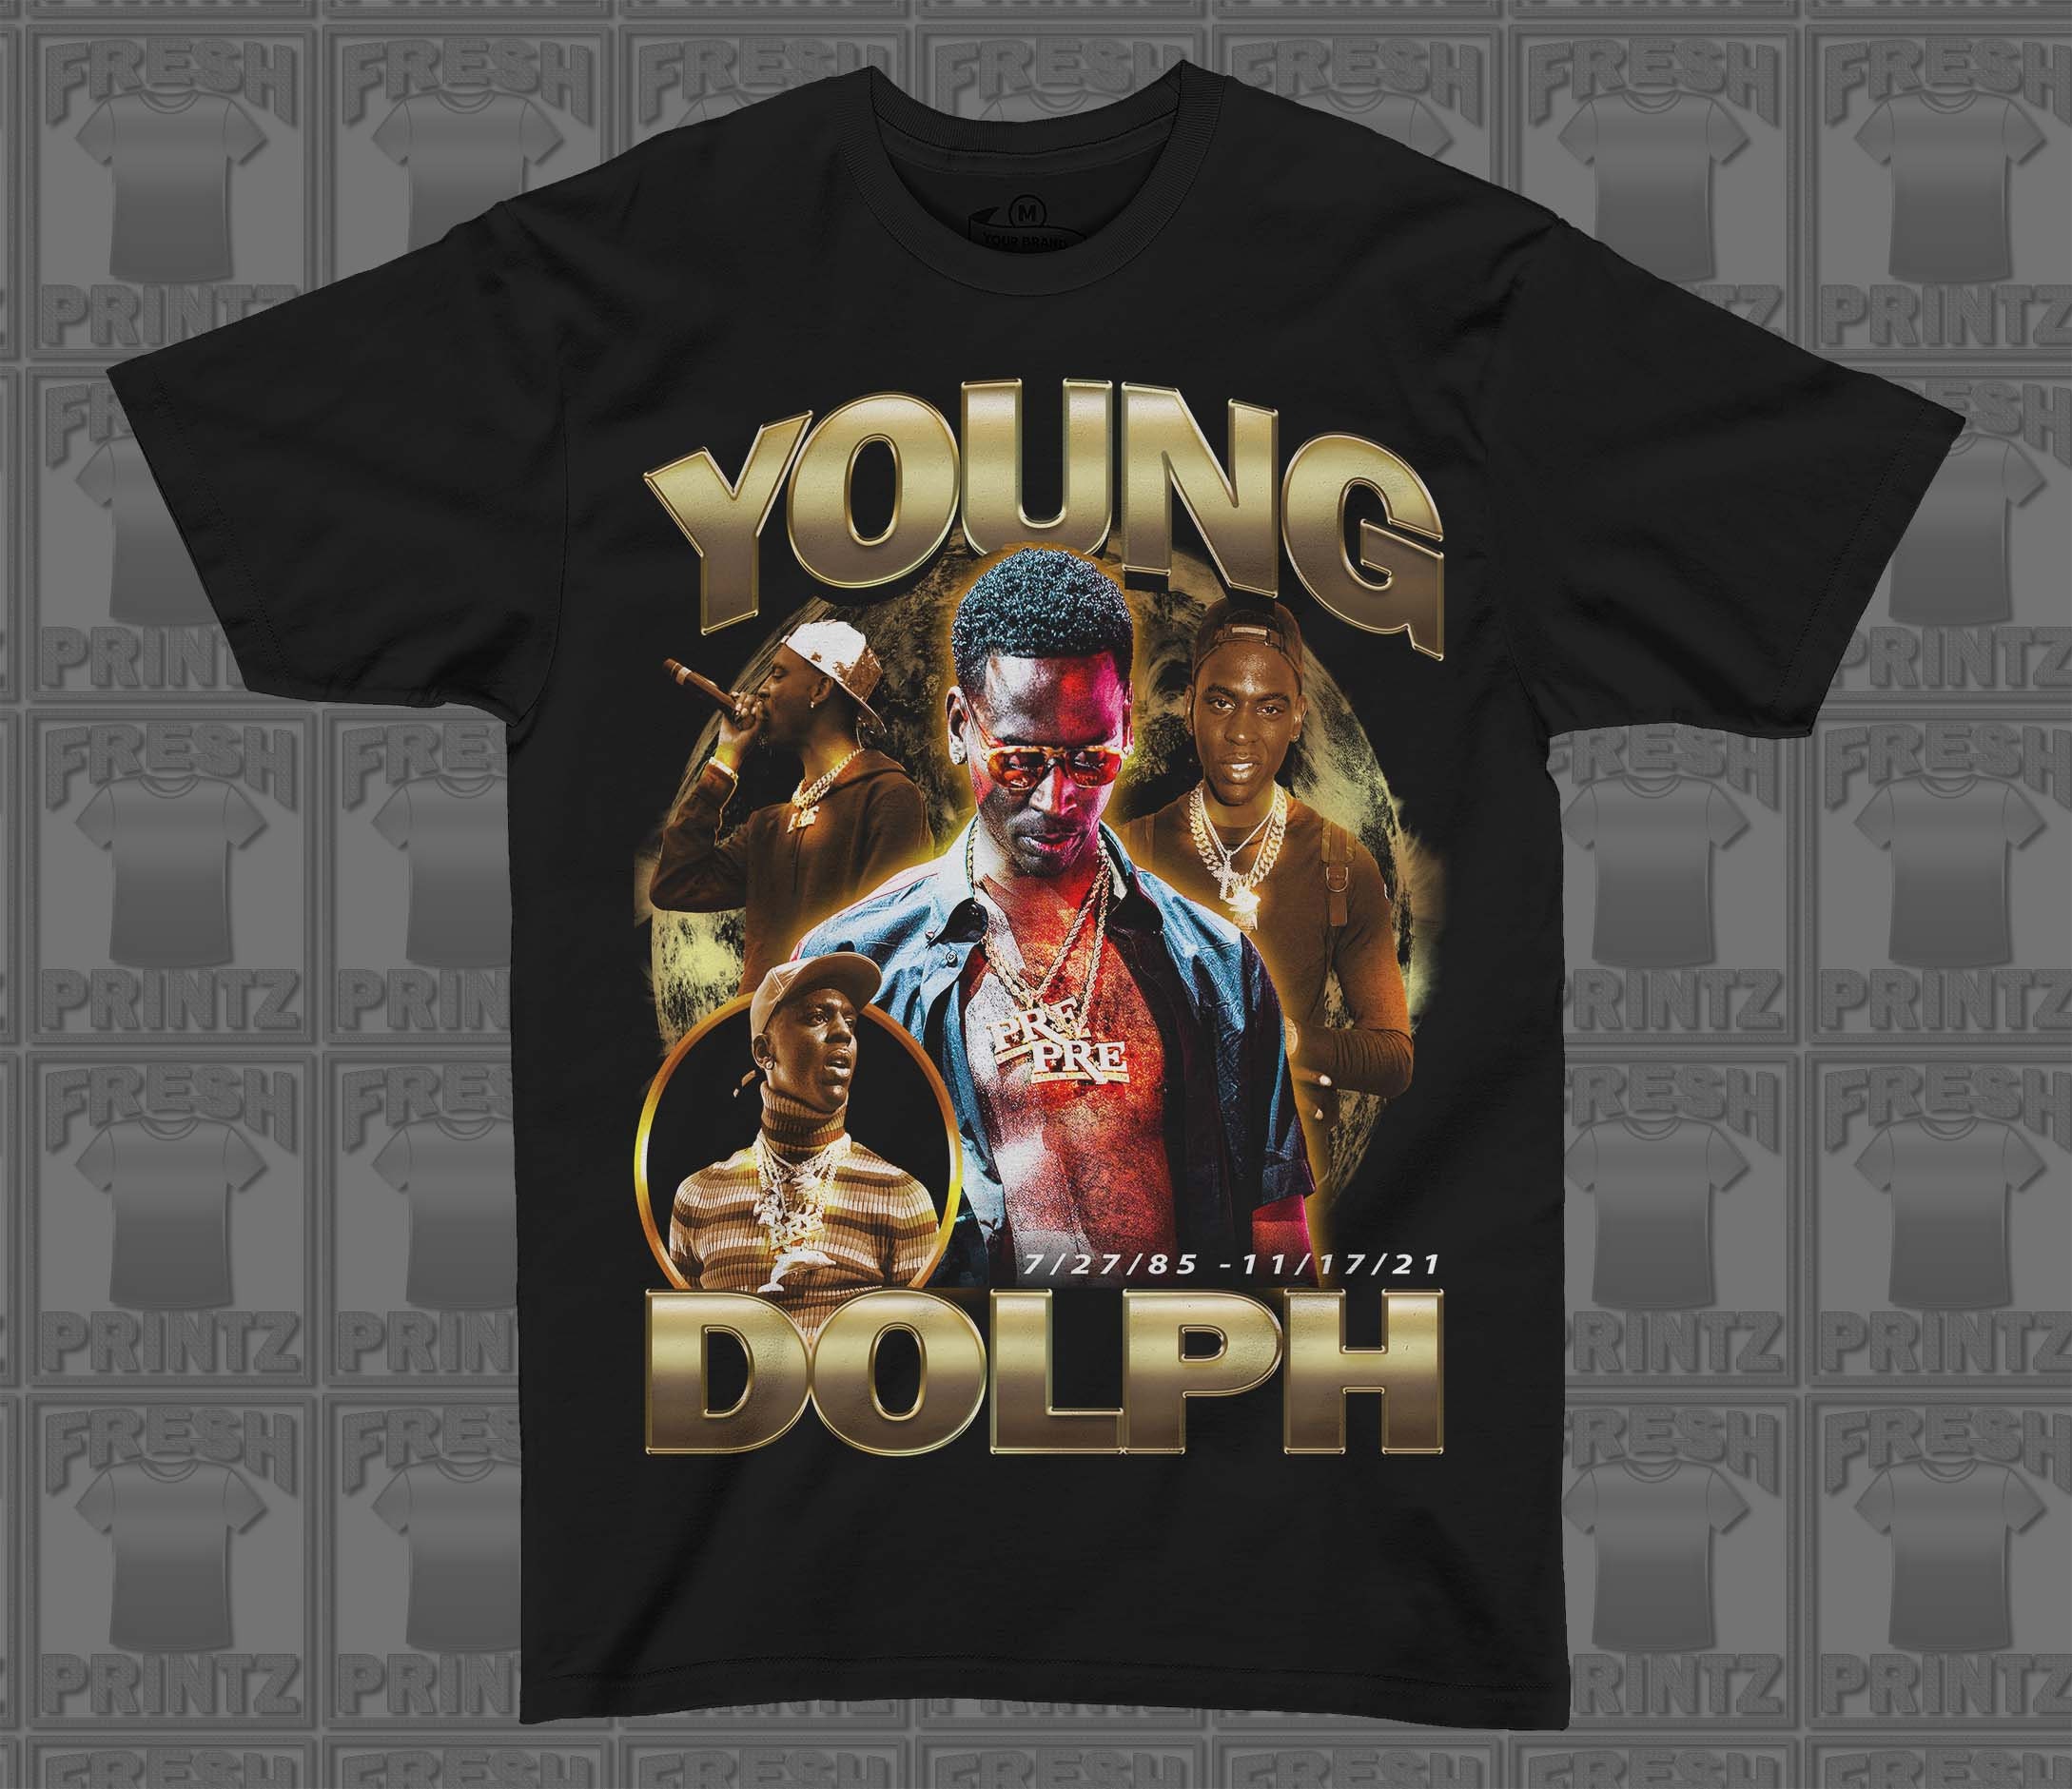 https://teeholly.com/wp-content/uploads/2022/03/young-dolph-rap-tee-vintage-shirt_1647571854.jpg